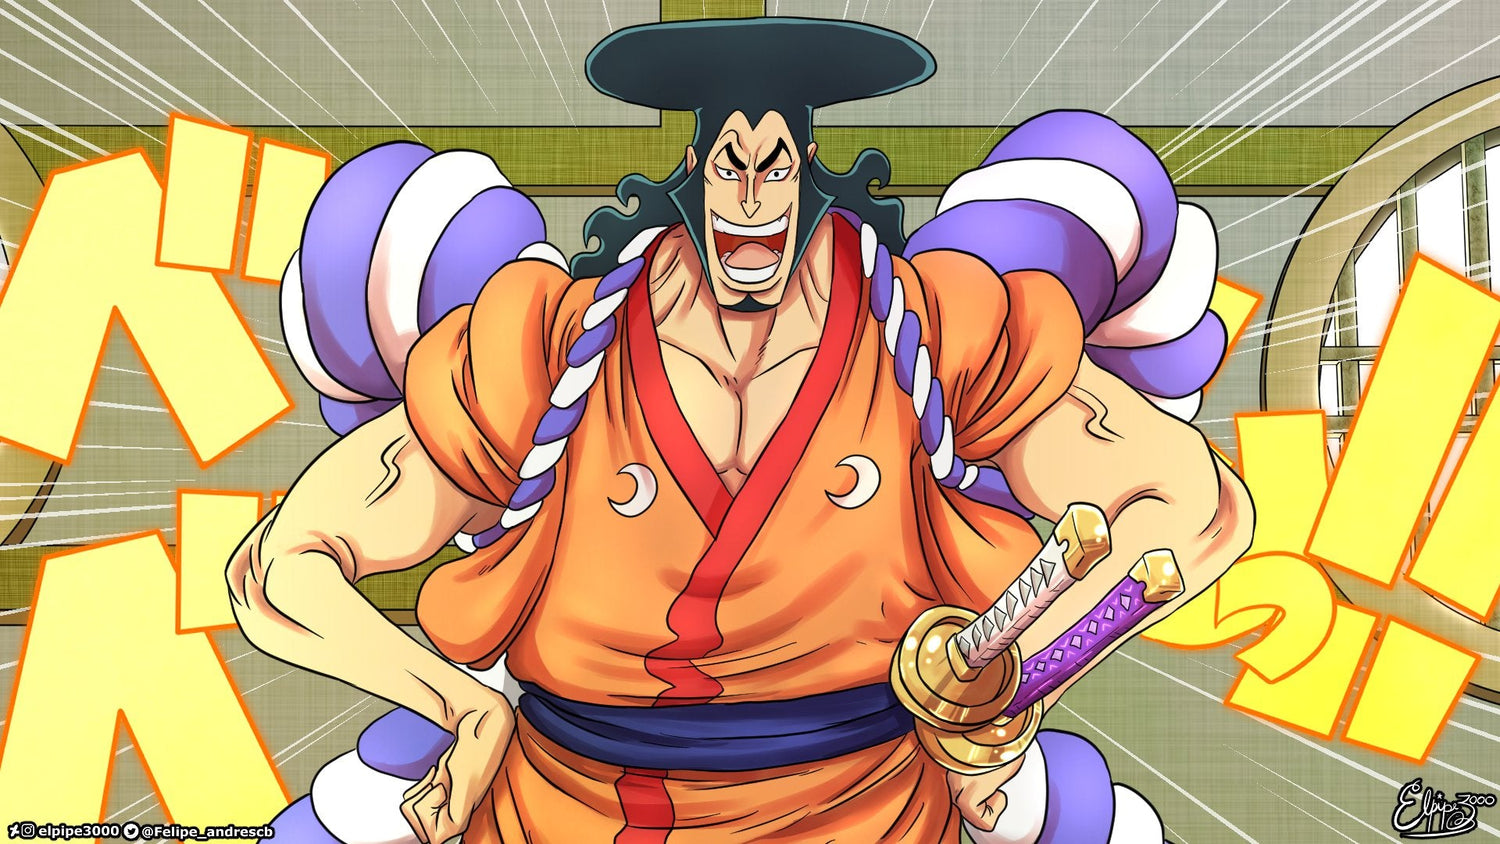 Kozuki Oden from One Piece: The Legendary Samurai’s Height, Legacy, and Tragic Death - Seakoff